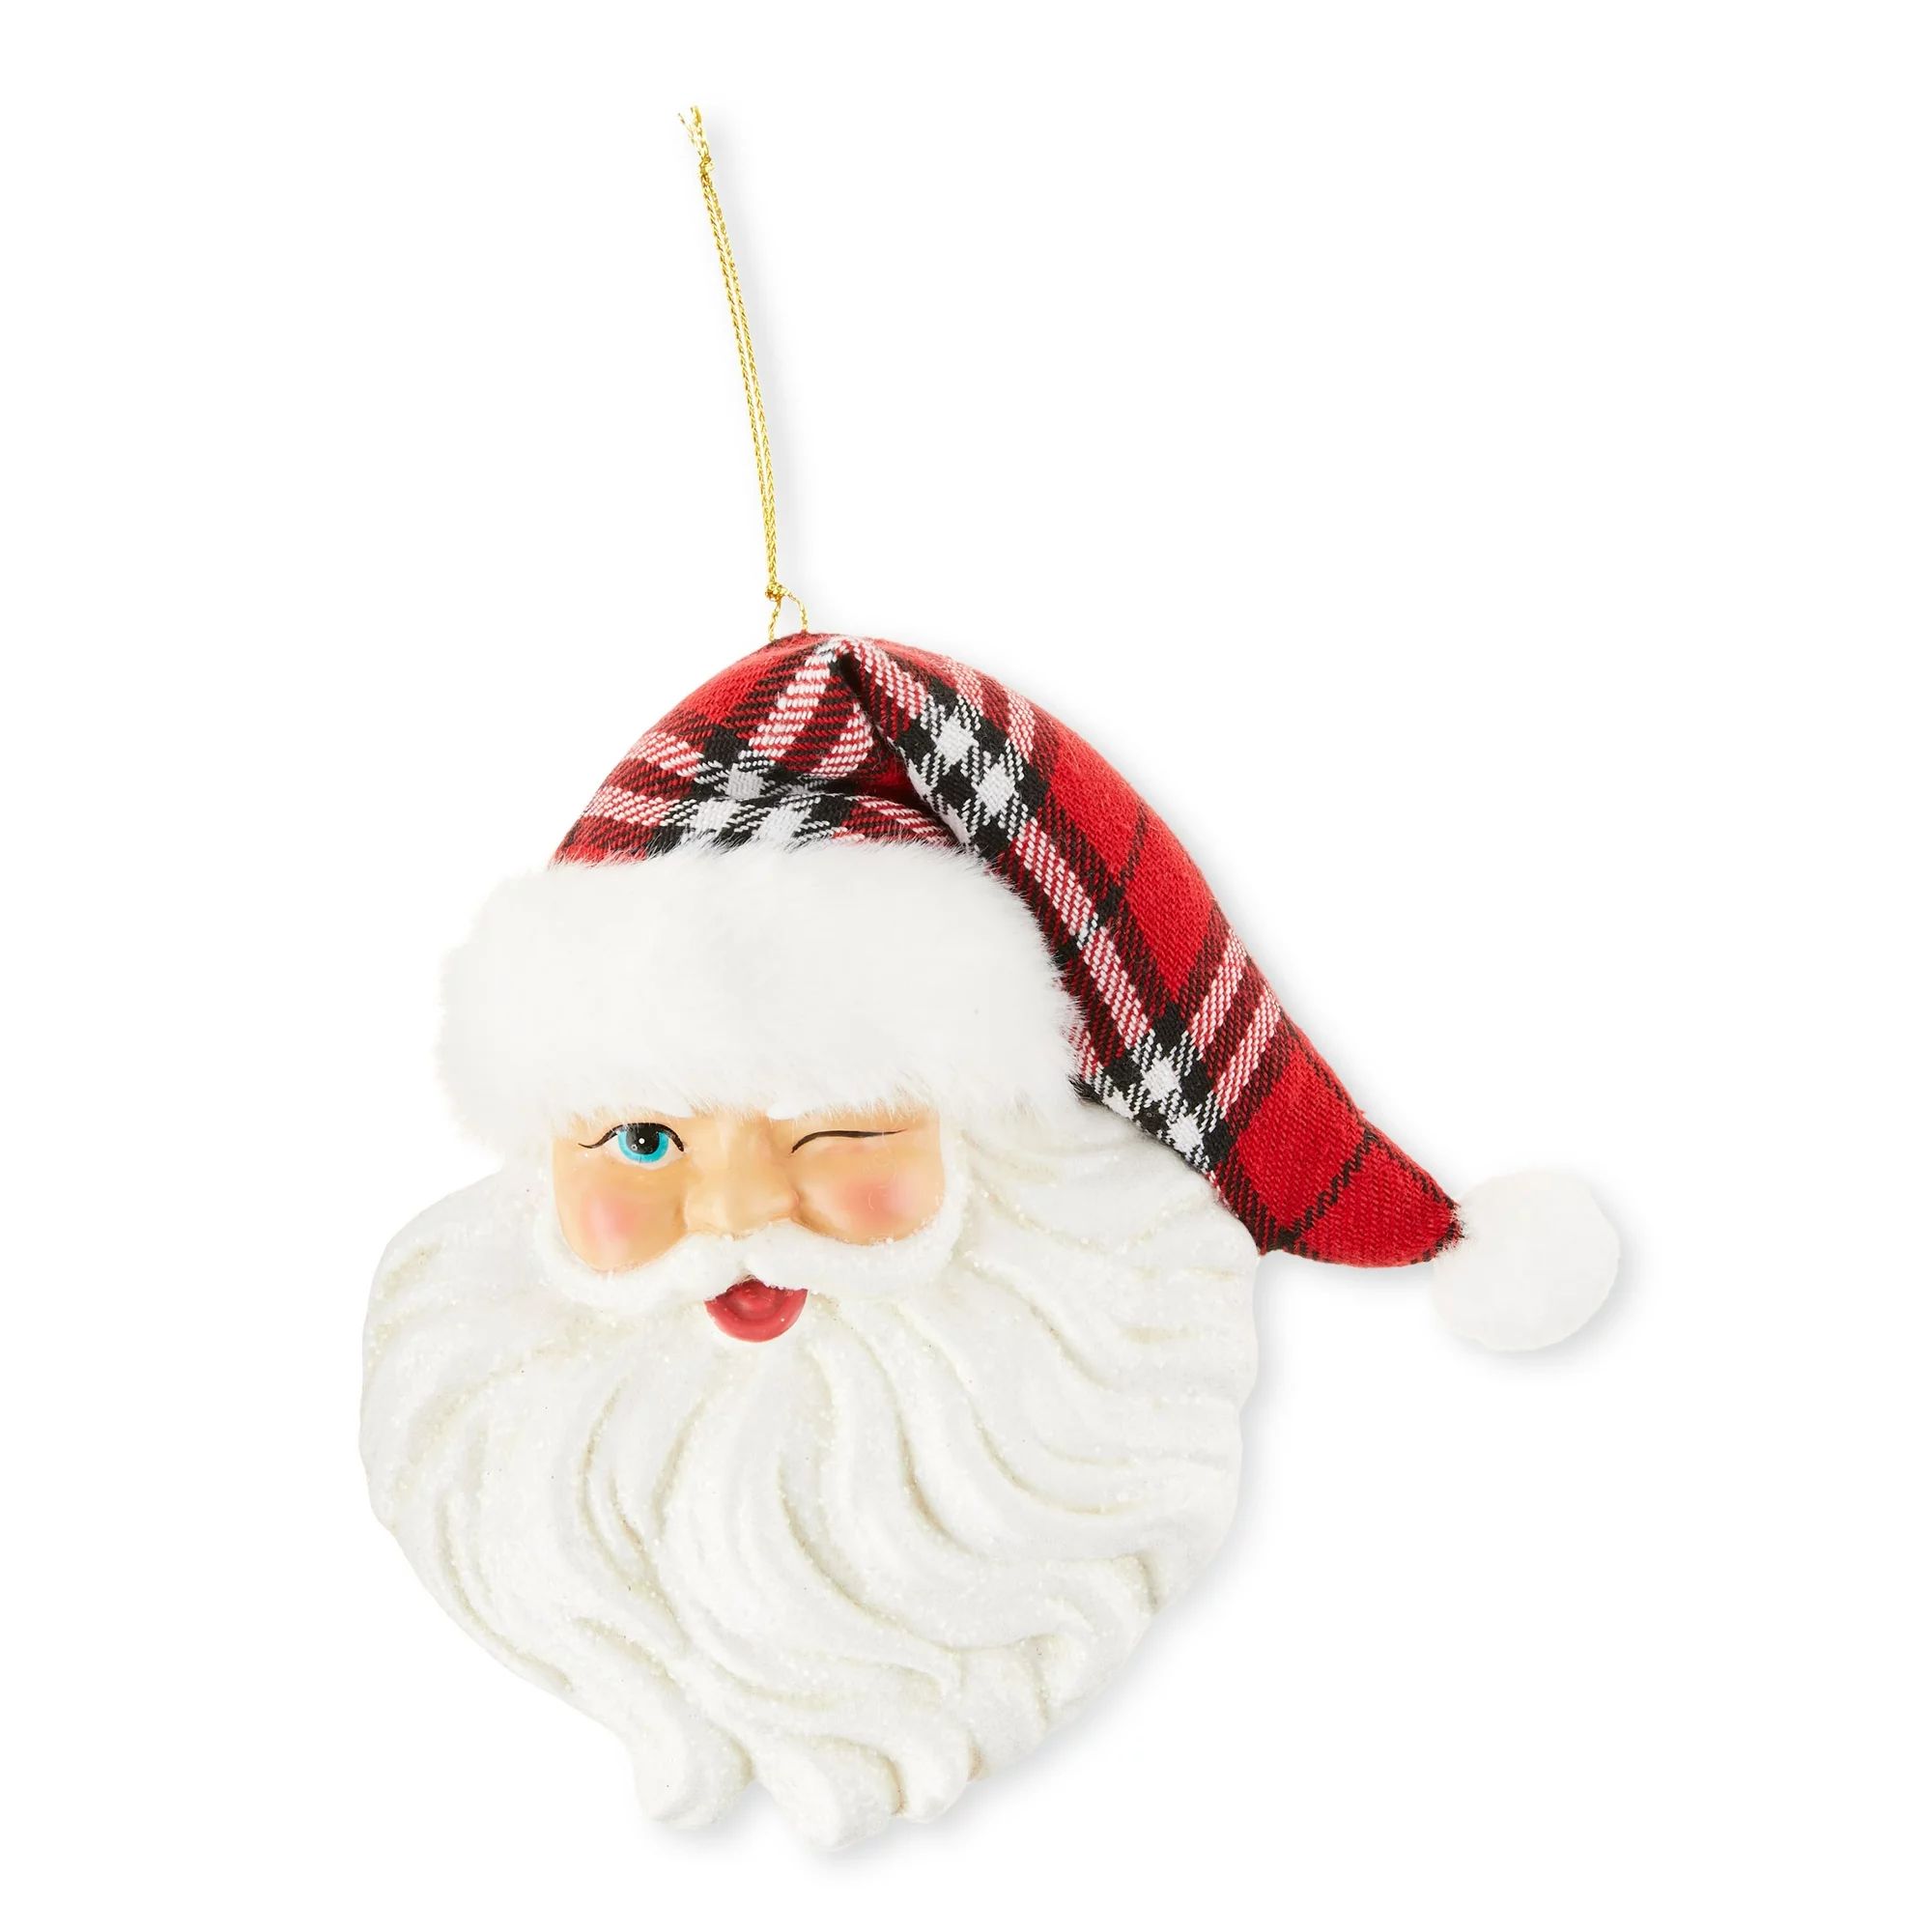 Plaid Hat Santa Head Ornament, Joyful Peace Theme, White & Red Color, 0.115kg, by Holiday Time | Walmart (US)